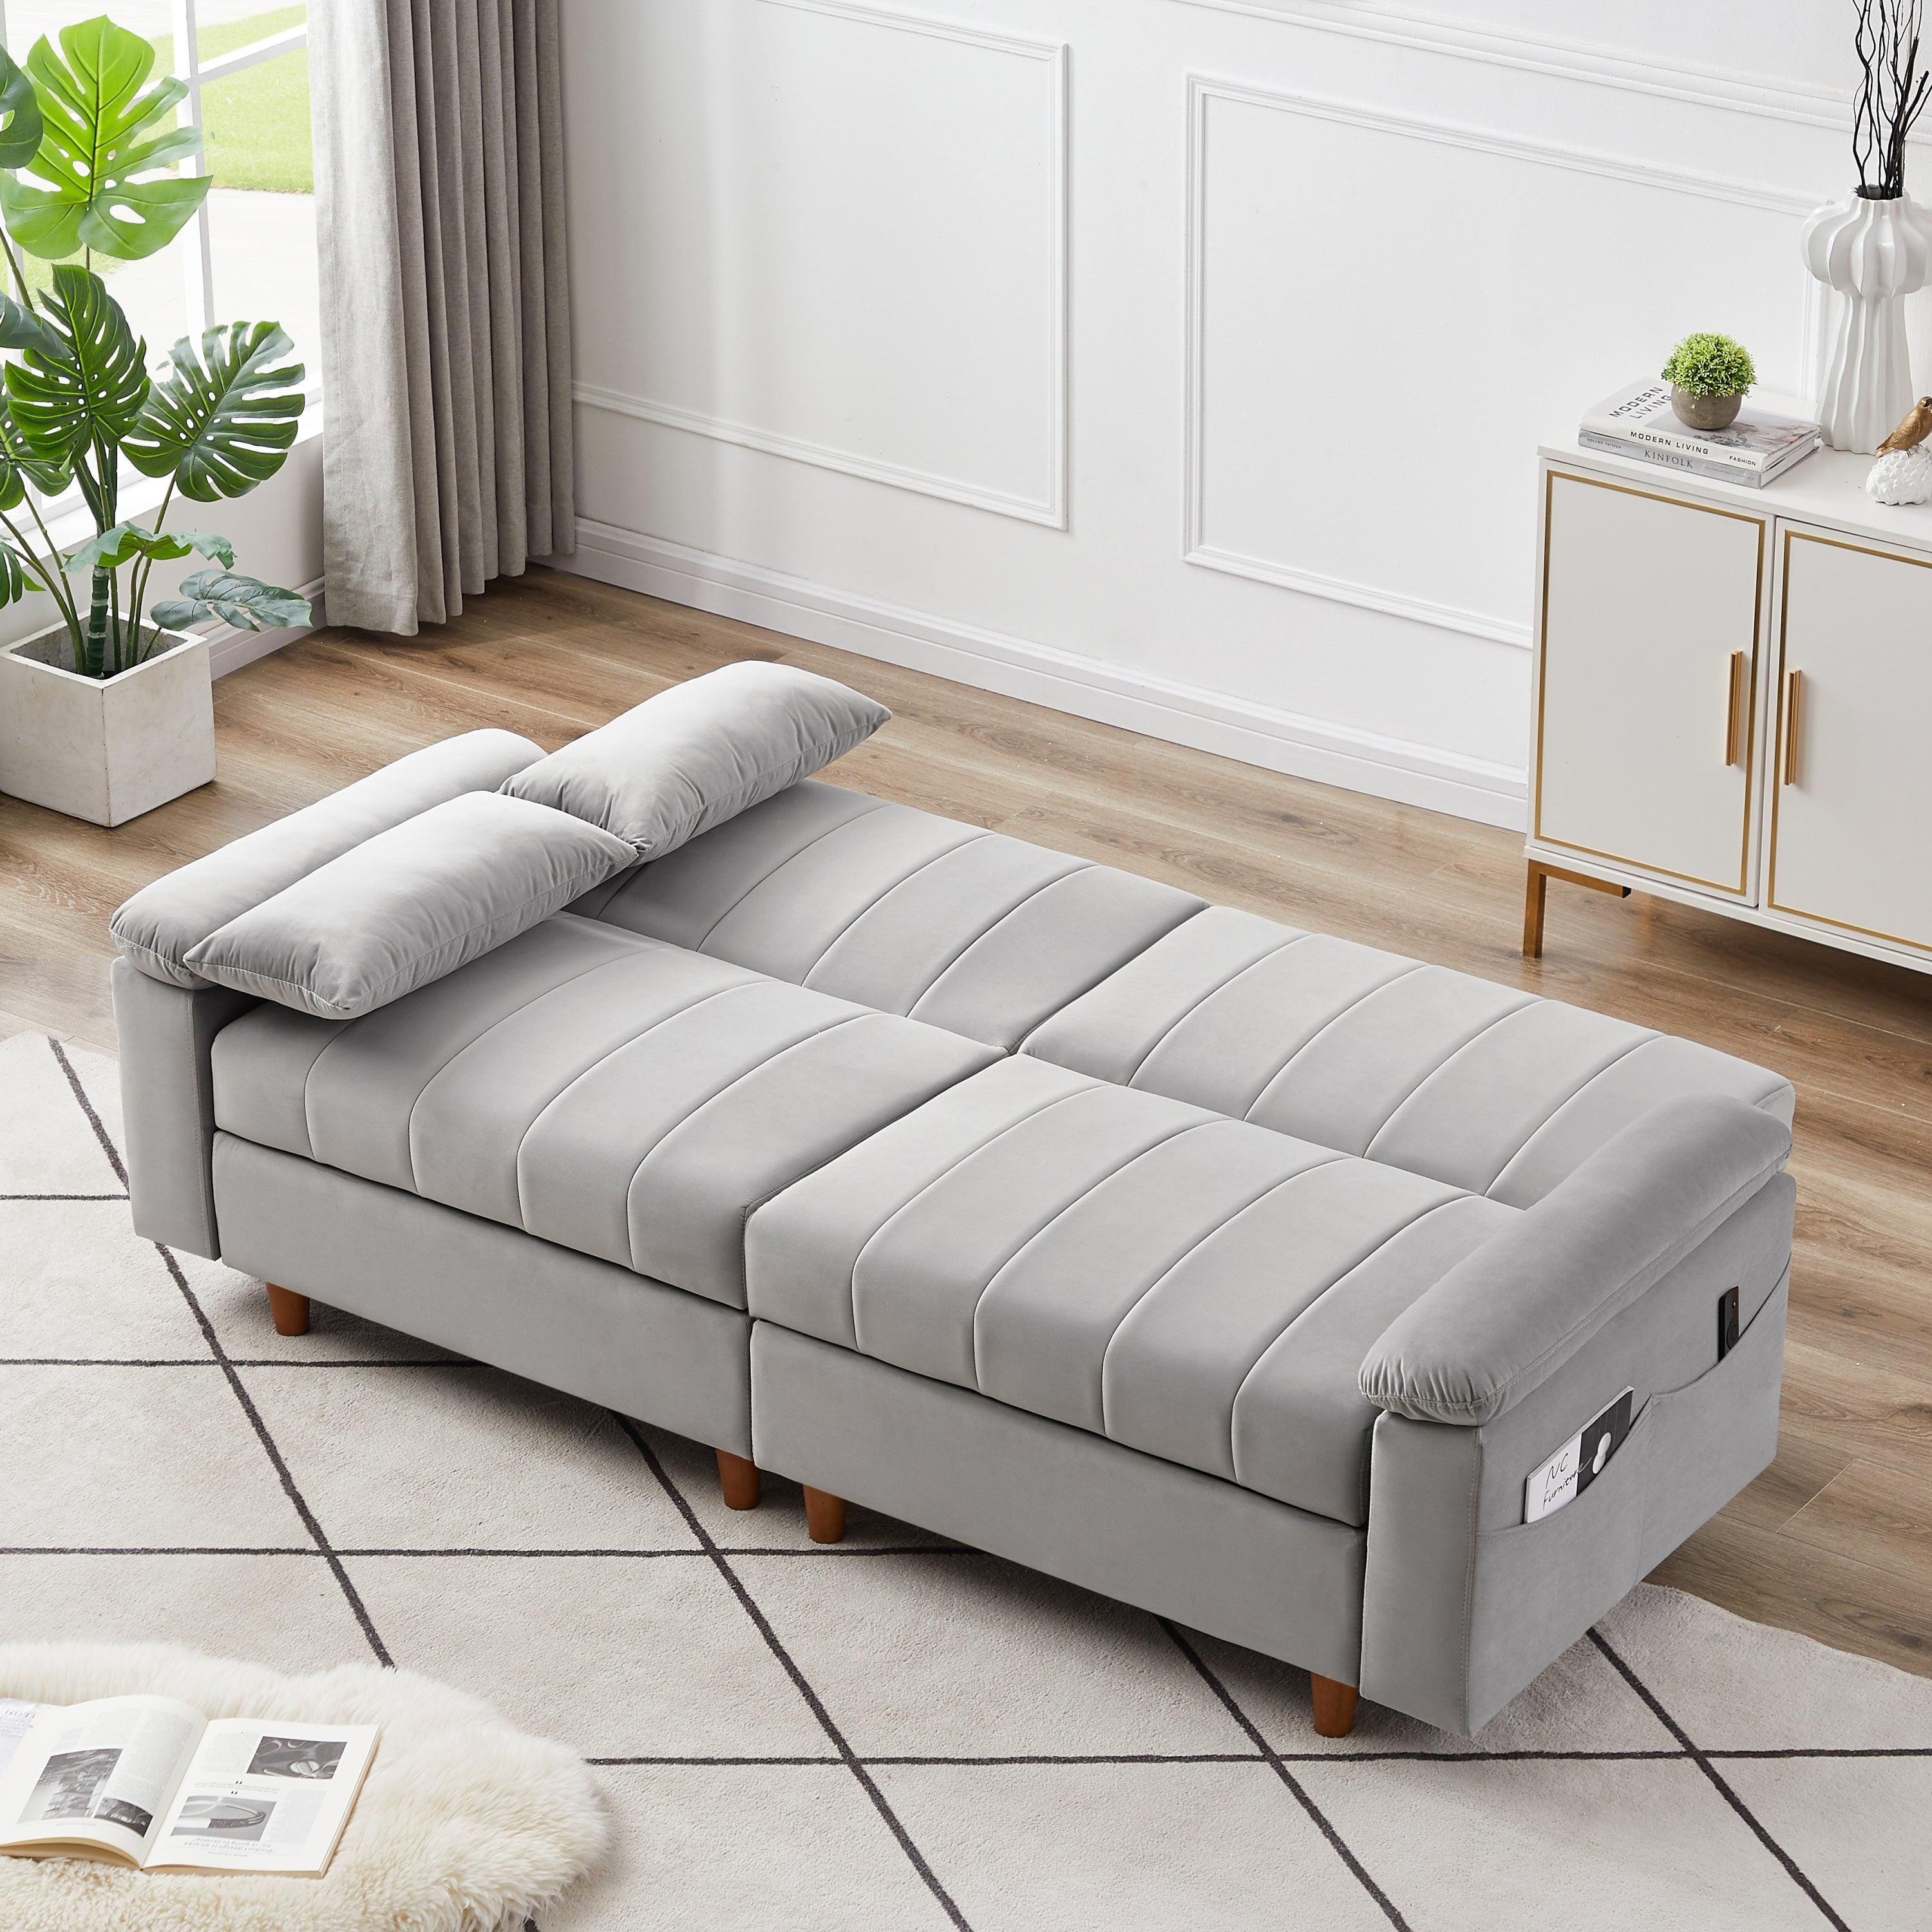 Convertible Comfortable Sleeper Velvet Sofa Couch with Storage for for Living Room Bedroom Futon loveseat Sofabed  Gray LamCham